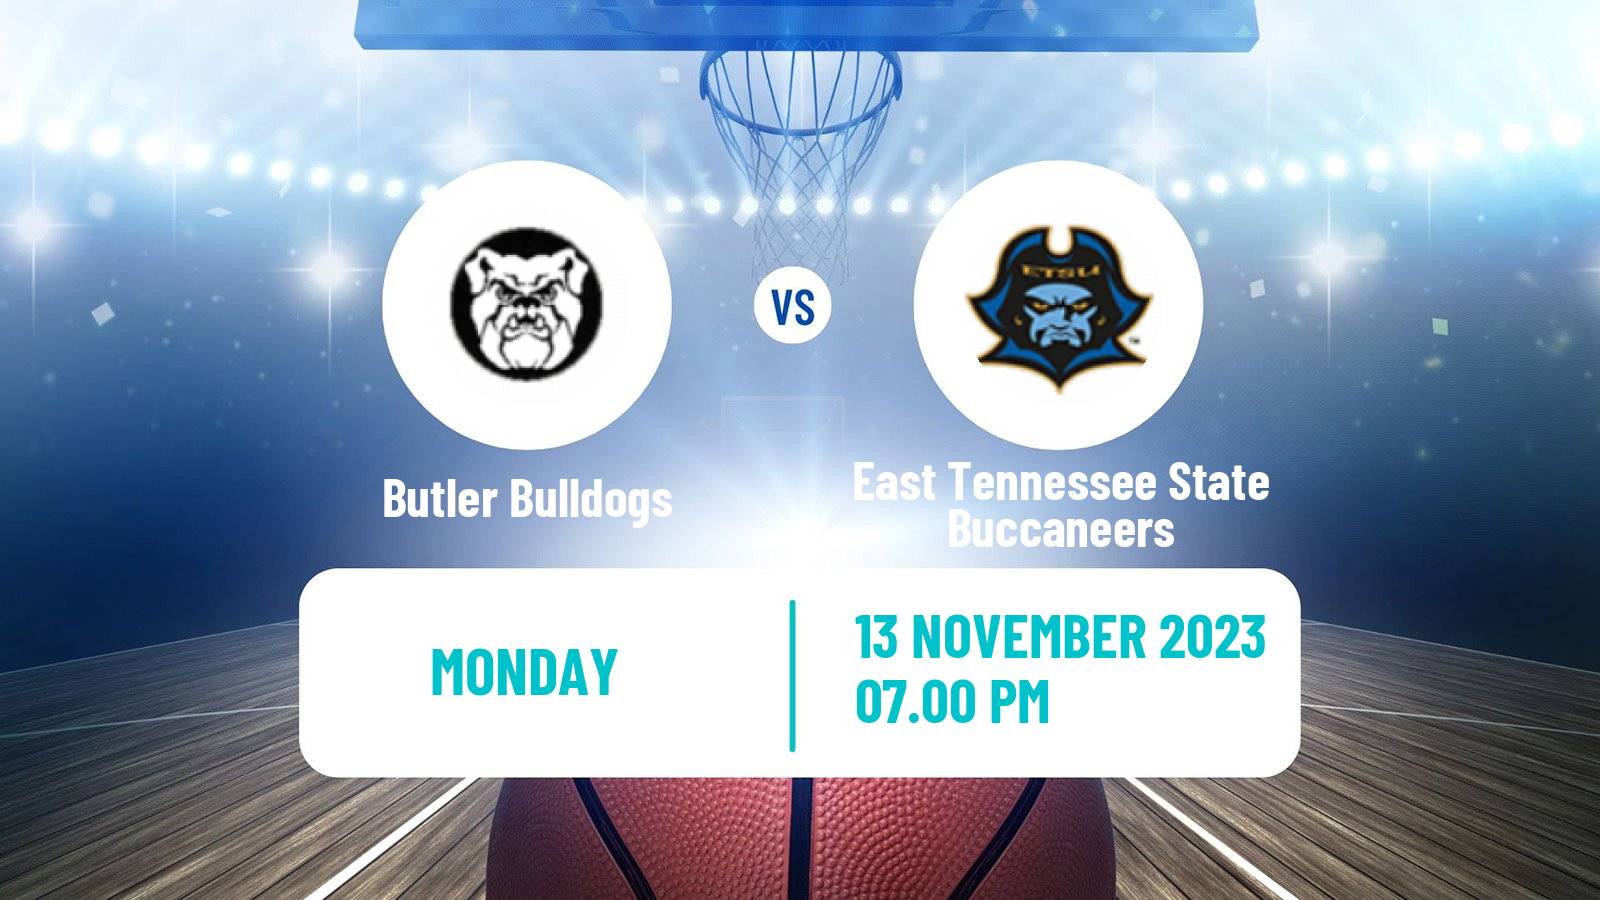 Basketball NCAA College Basketball Butler Bulldogs - East Tennessee State Buccaneers